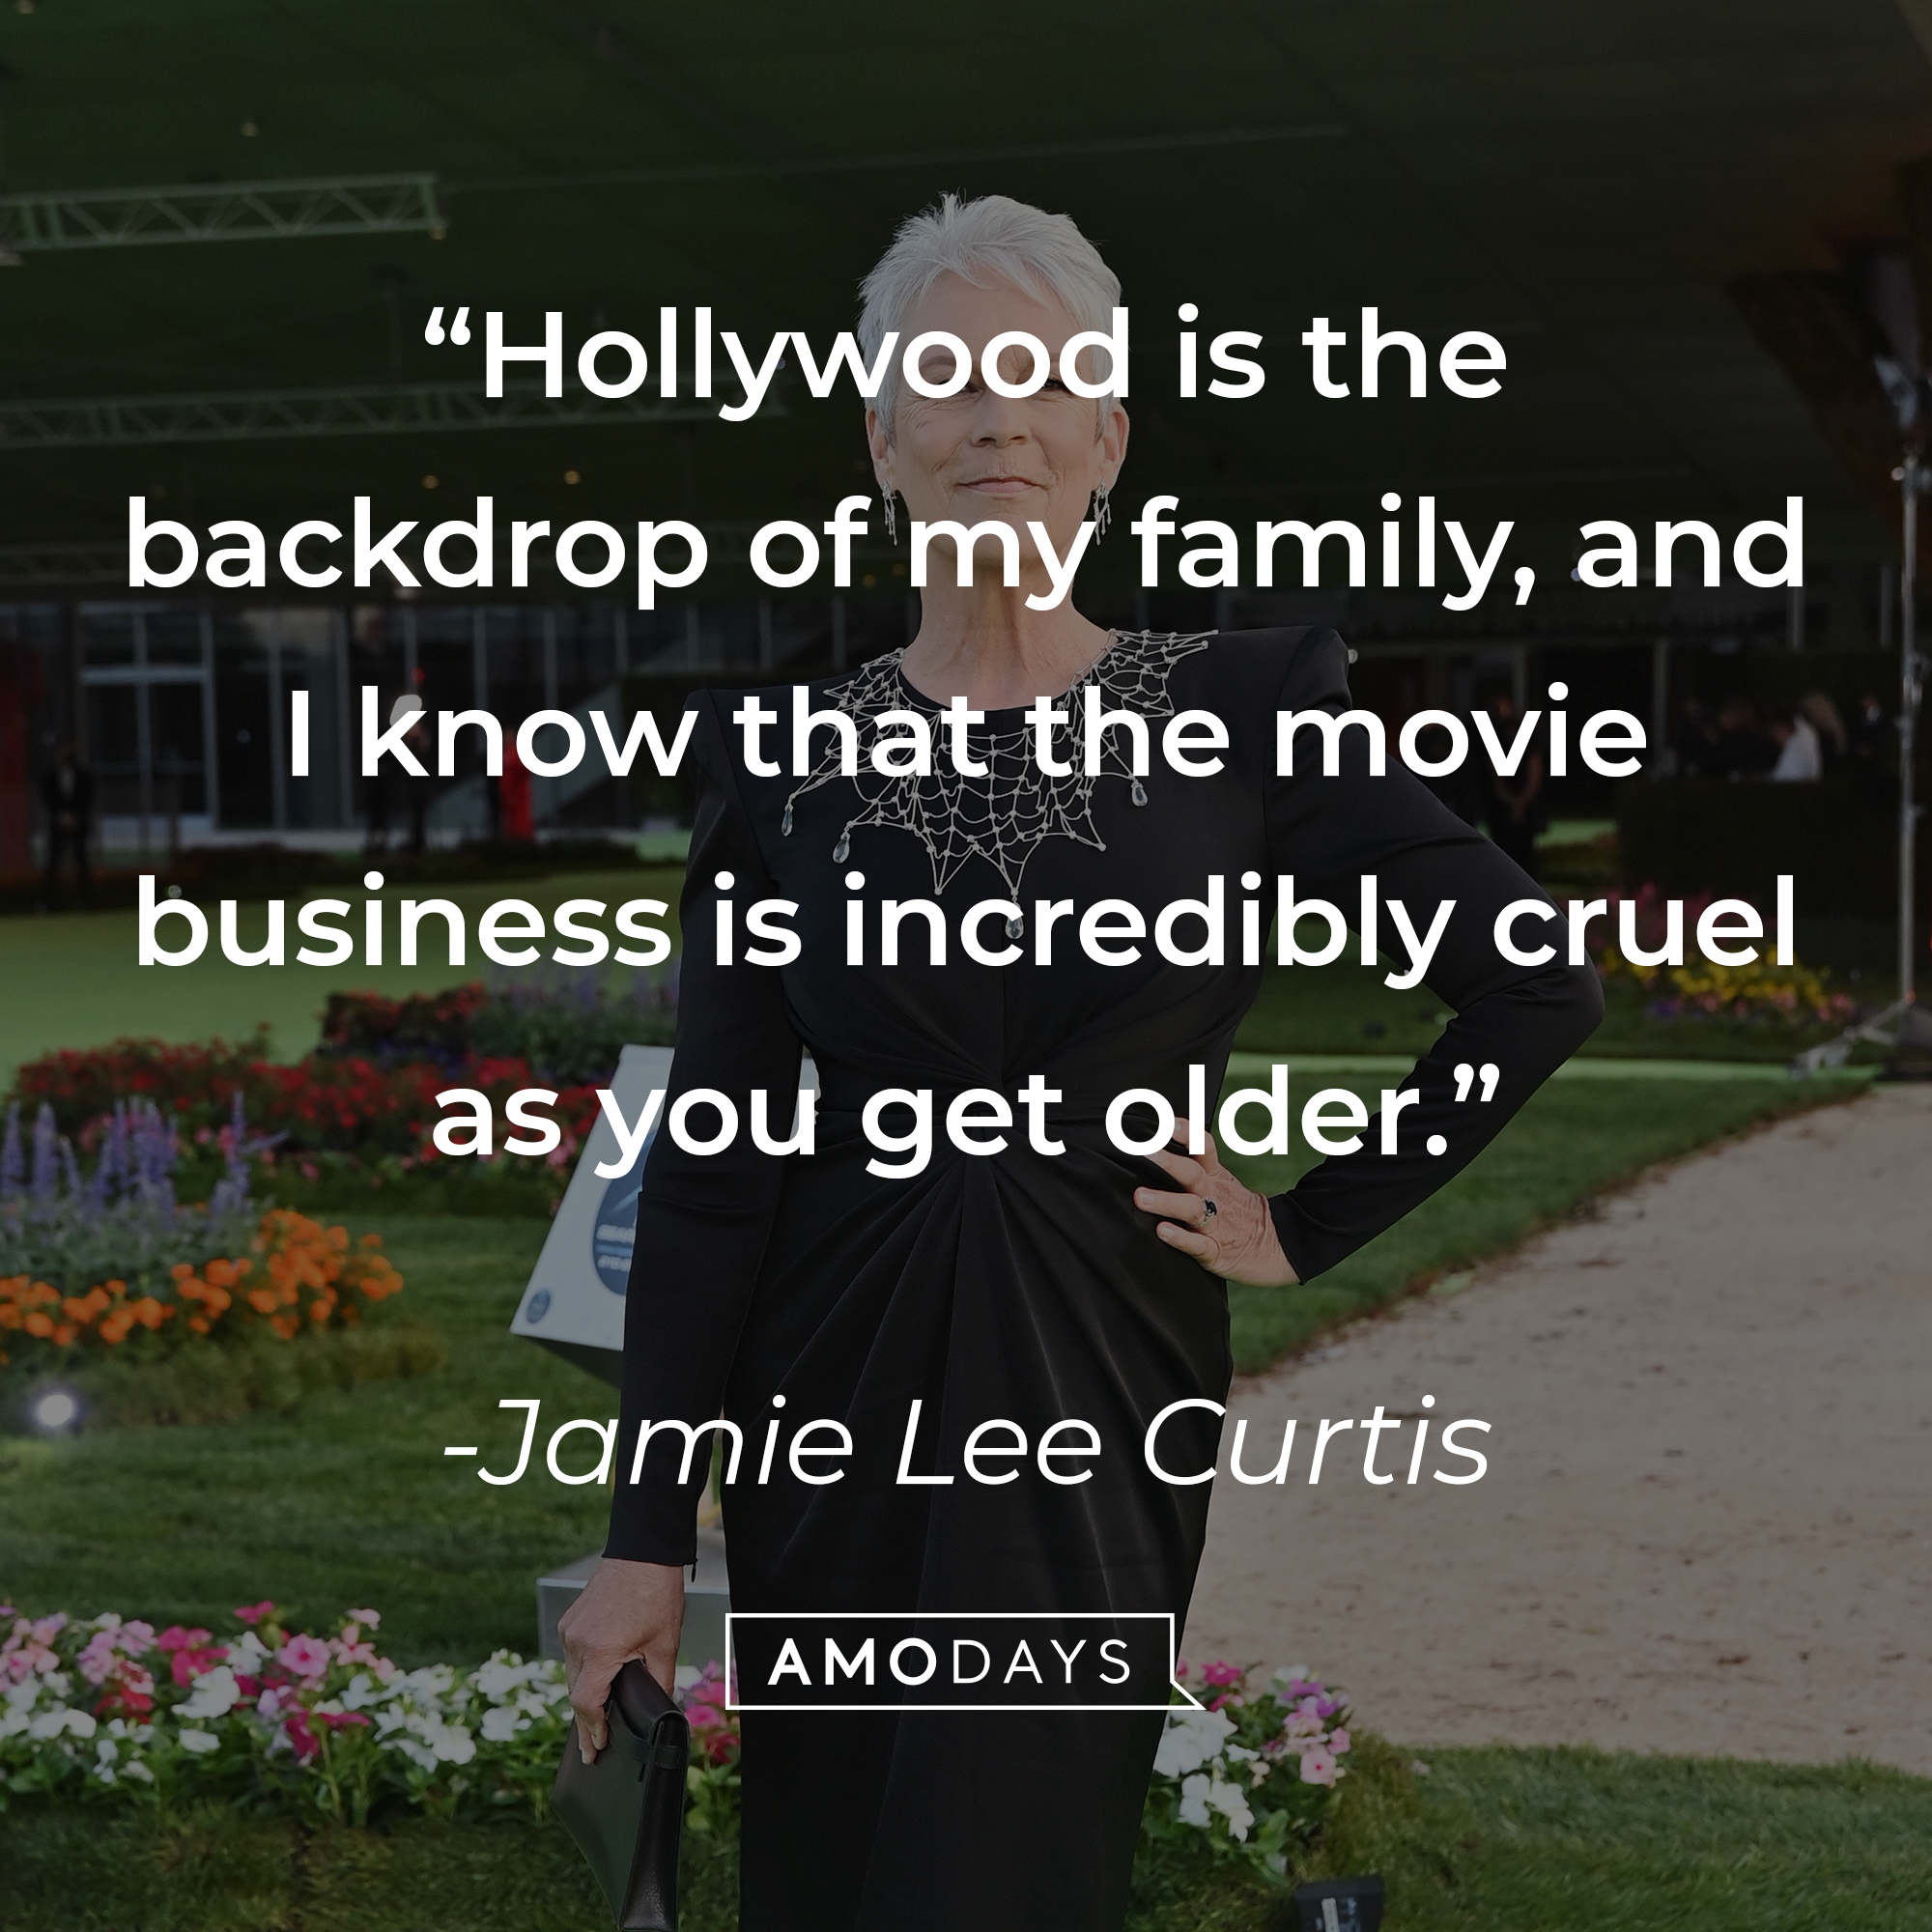 An image of Jamie Lee Curtis, with her quote: “Hollywood is the backdrop of my family, and I know that the movie business is incredibly cruel as you get older.” | Source: Getty Images